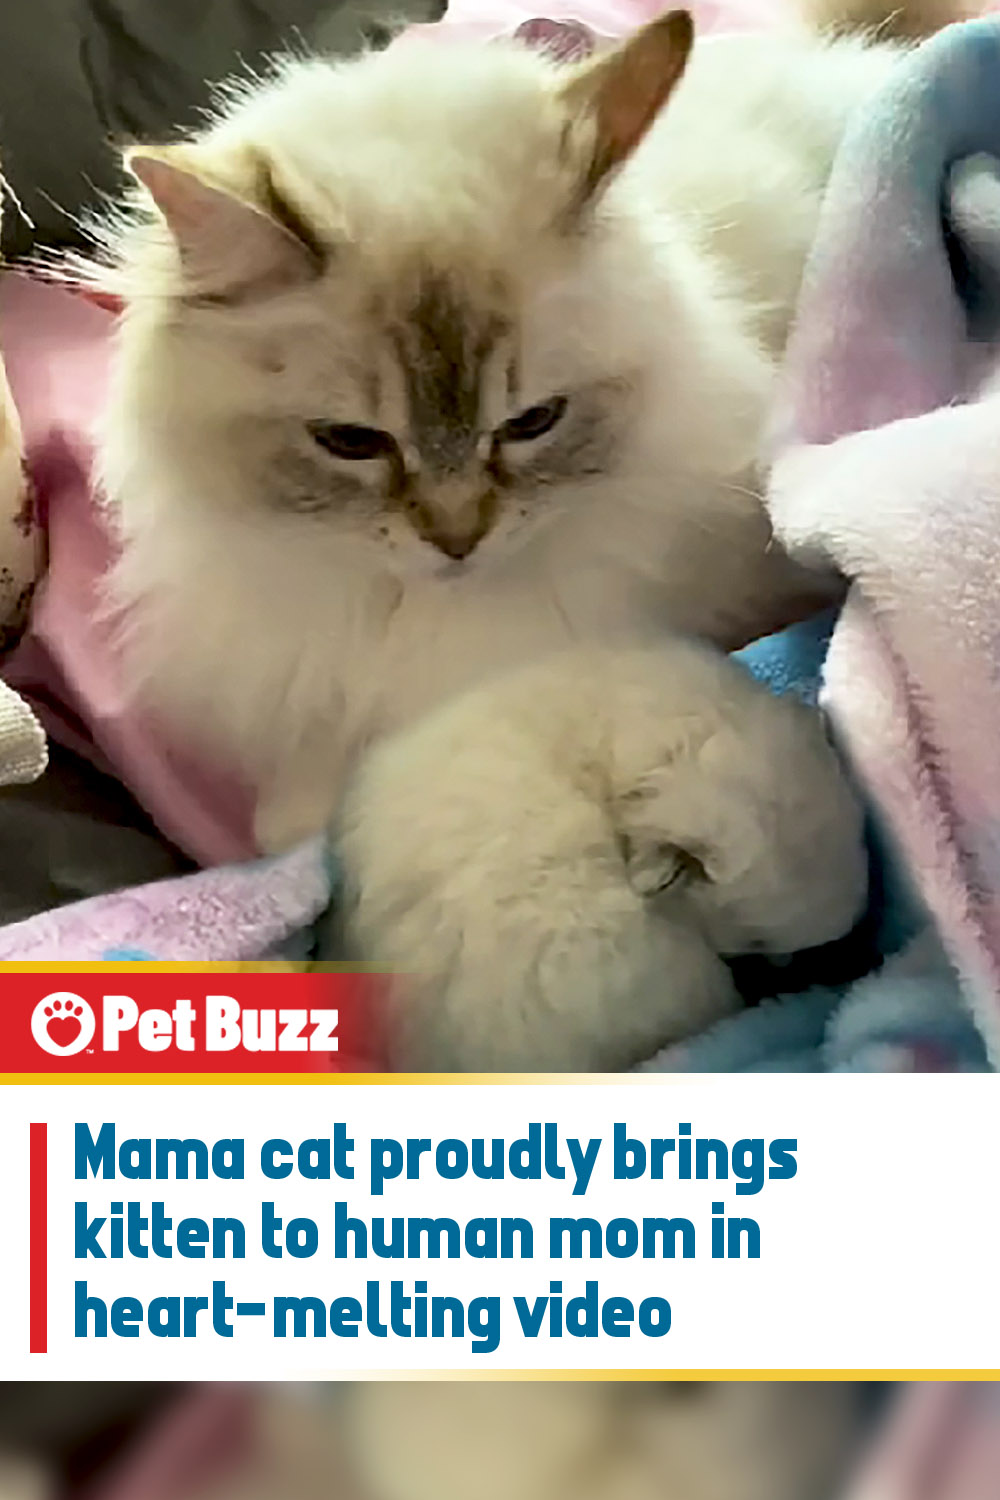 Mama cat proudly brings kitten to human mom in heart-melting video